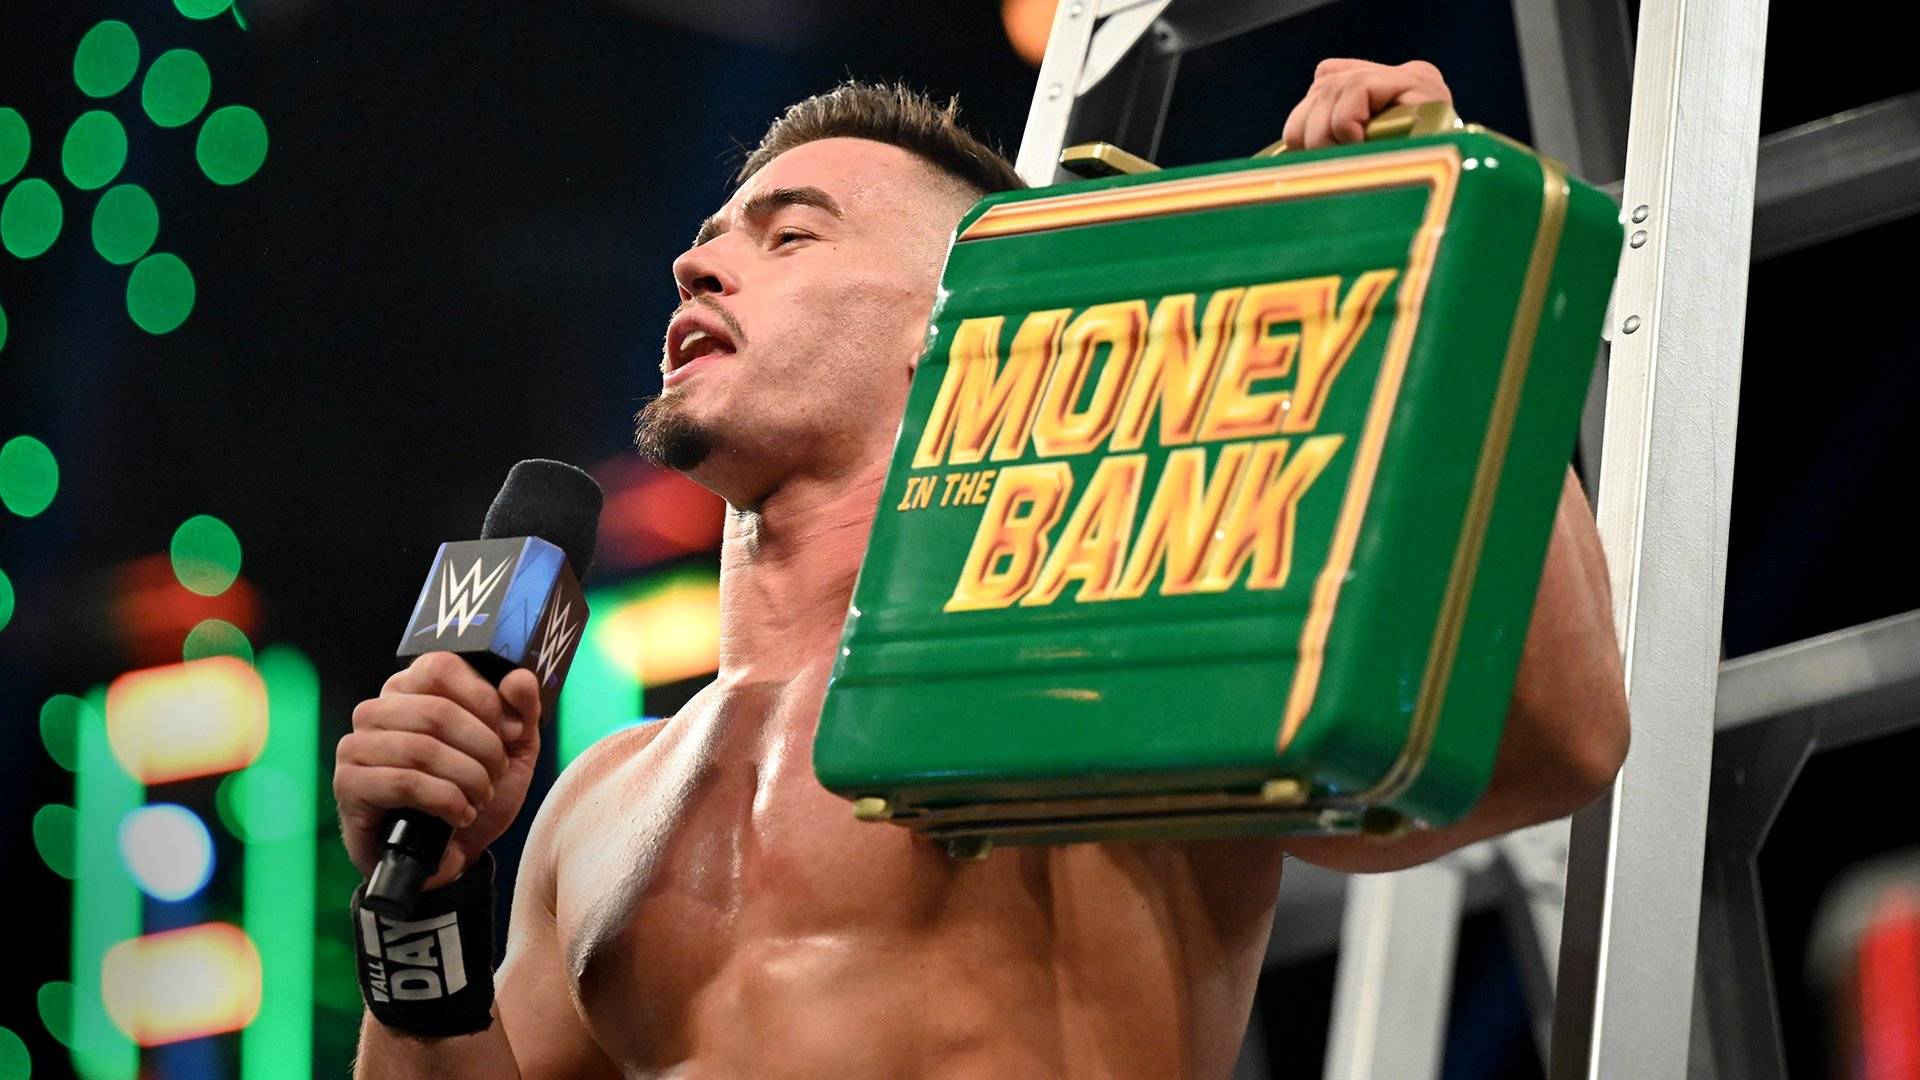 Theory won WWE Money in the Bank on July 2